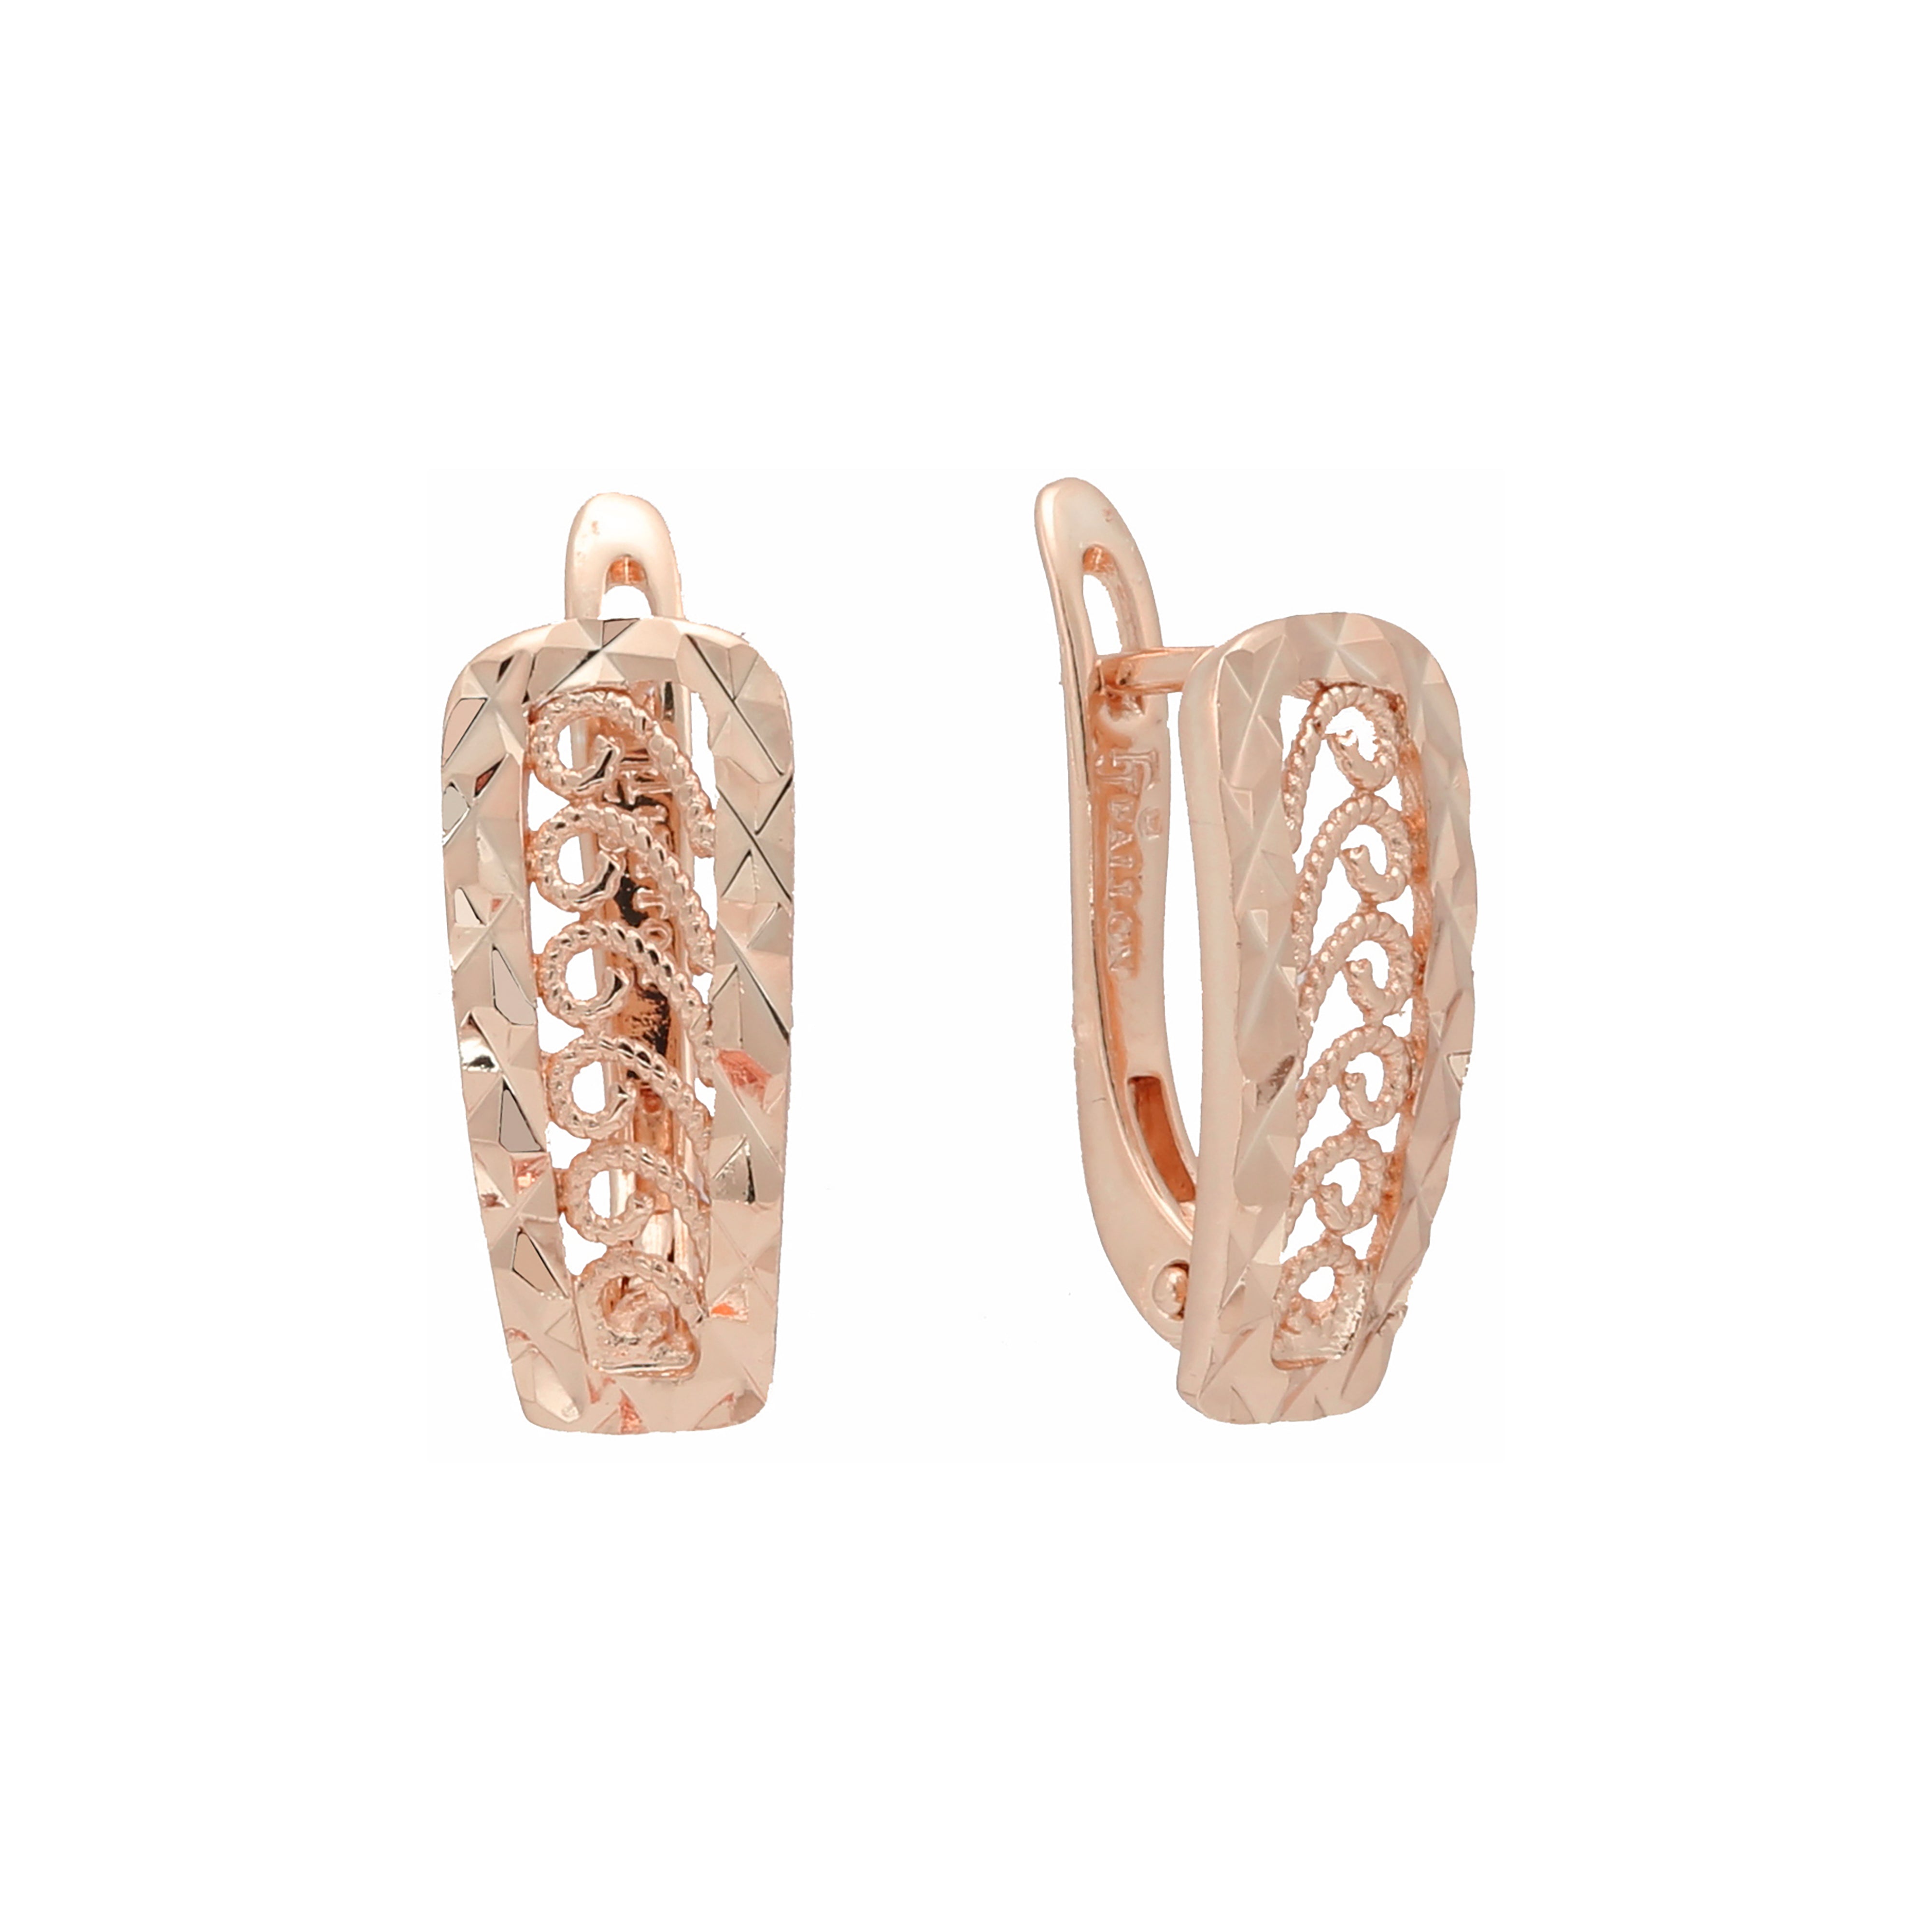 .Waves & tail of 9 Earrings in 14K Gold, Rose Gold, two tone plating colors